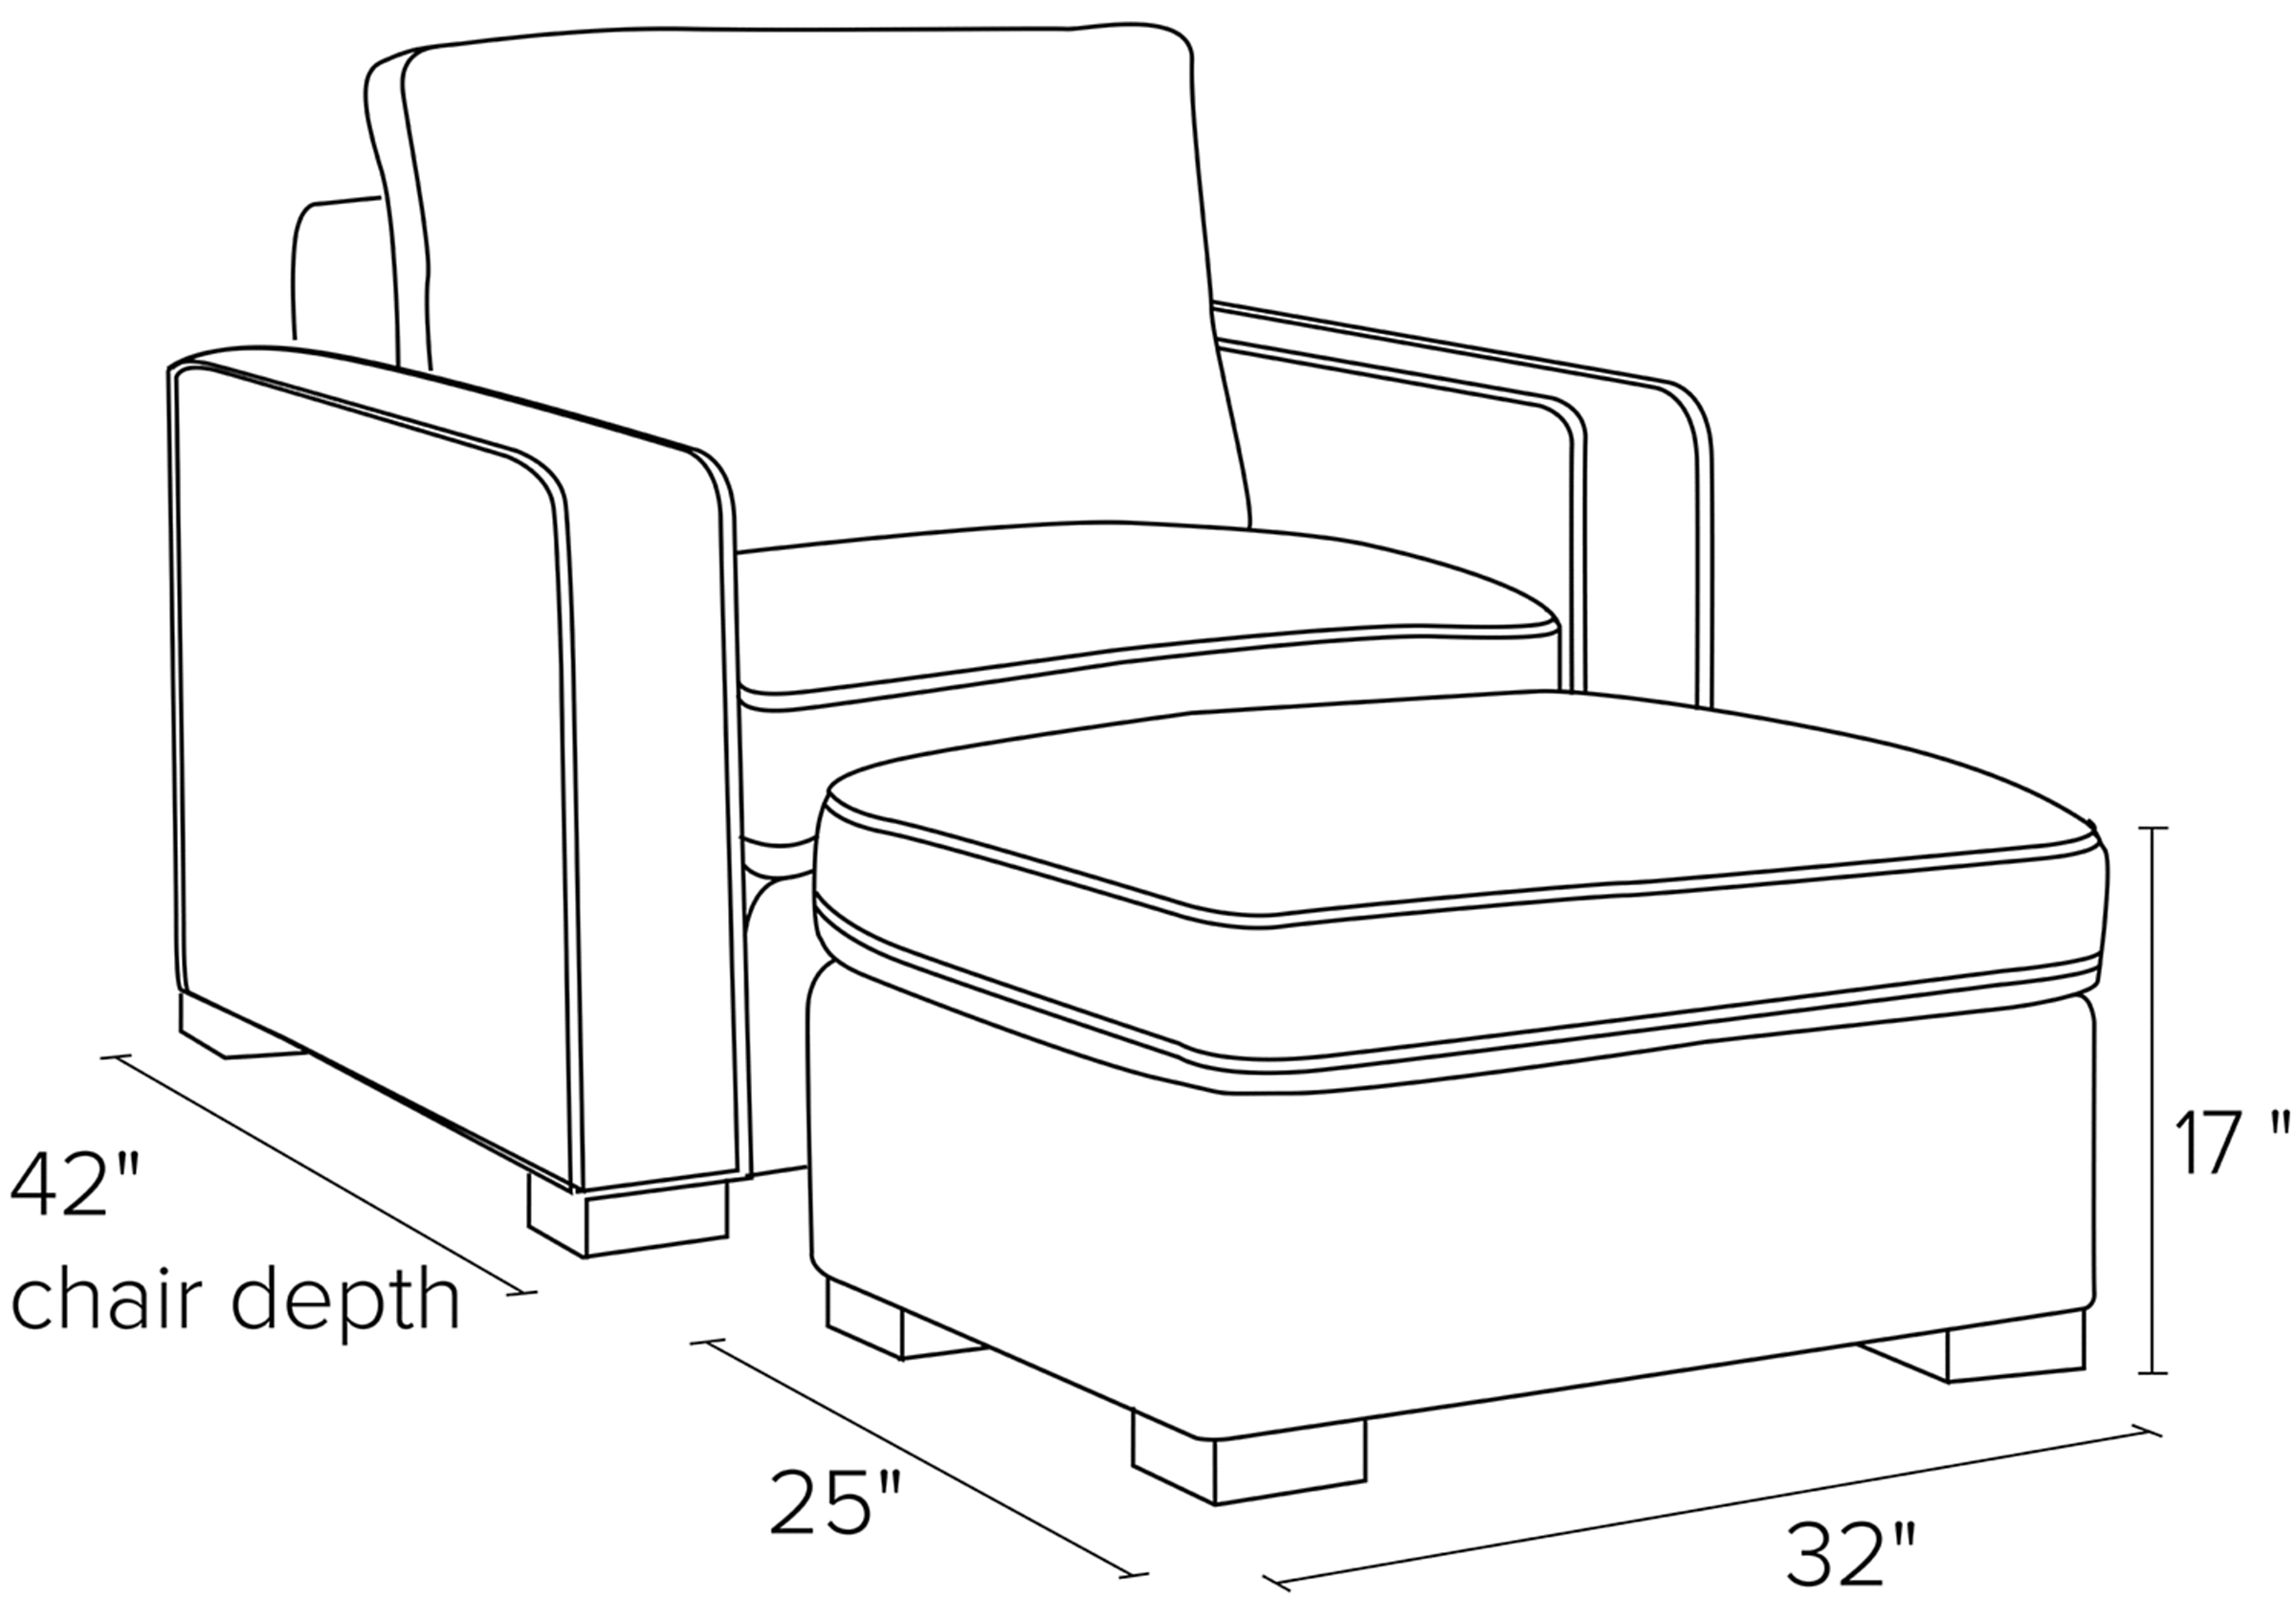 Side view dimension illustration of Morrison chair and ottoman.